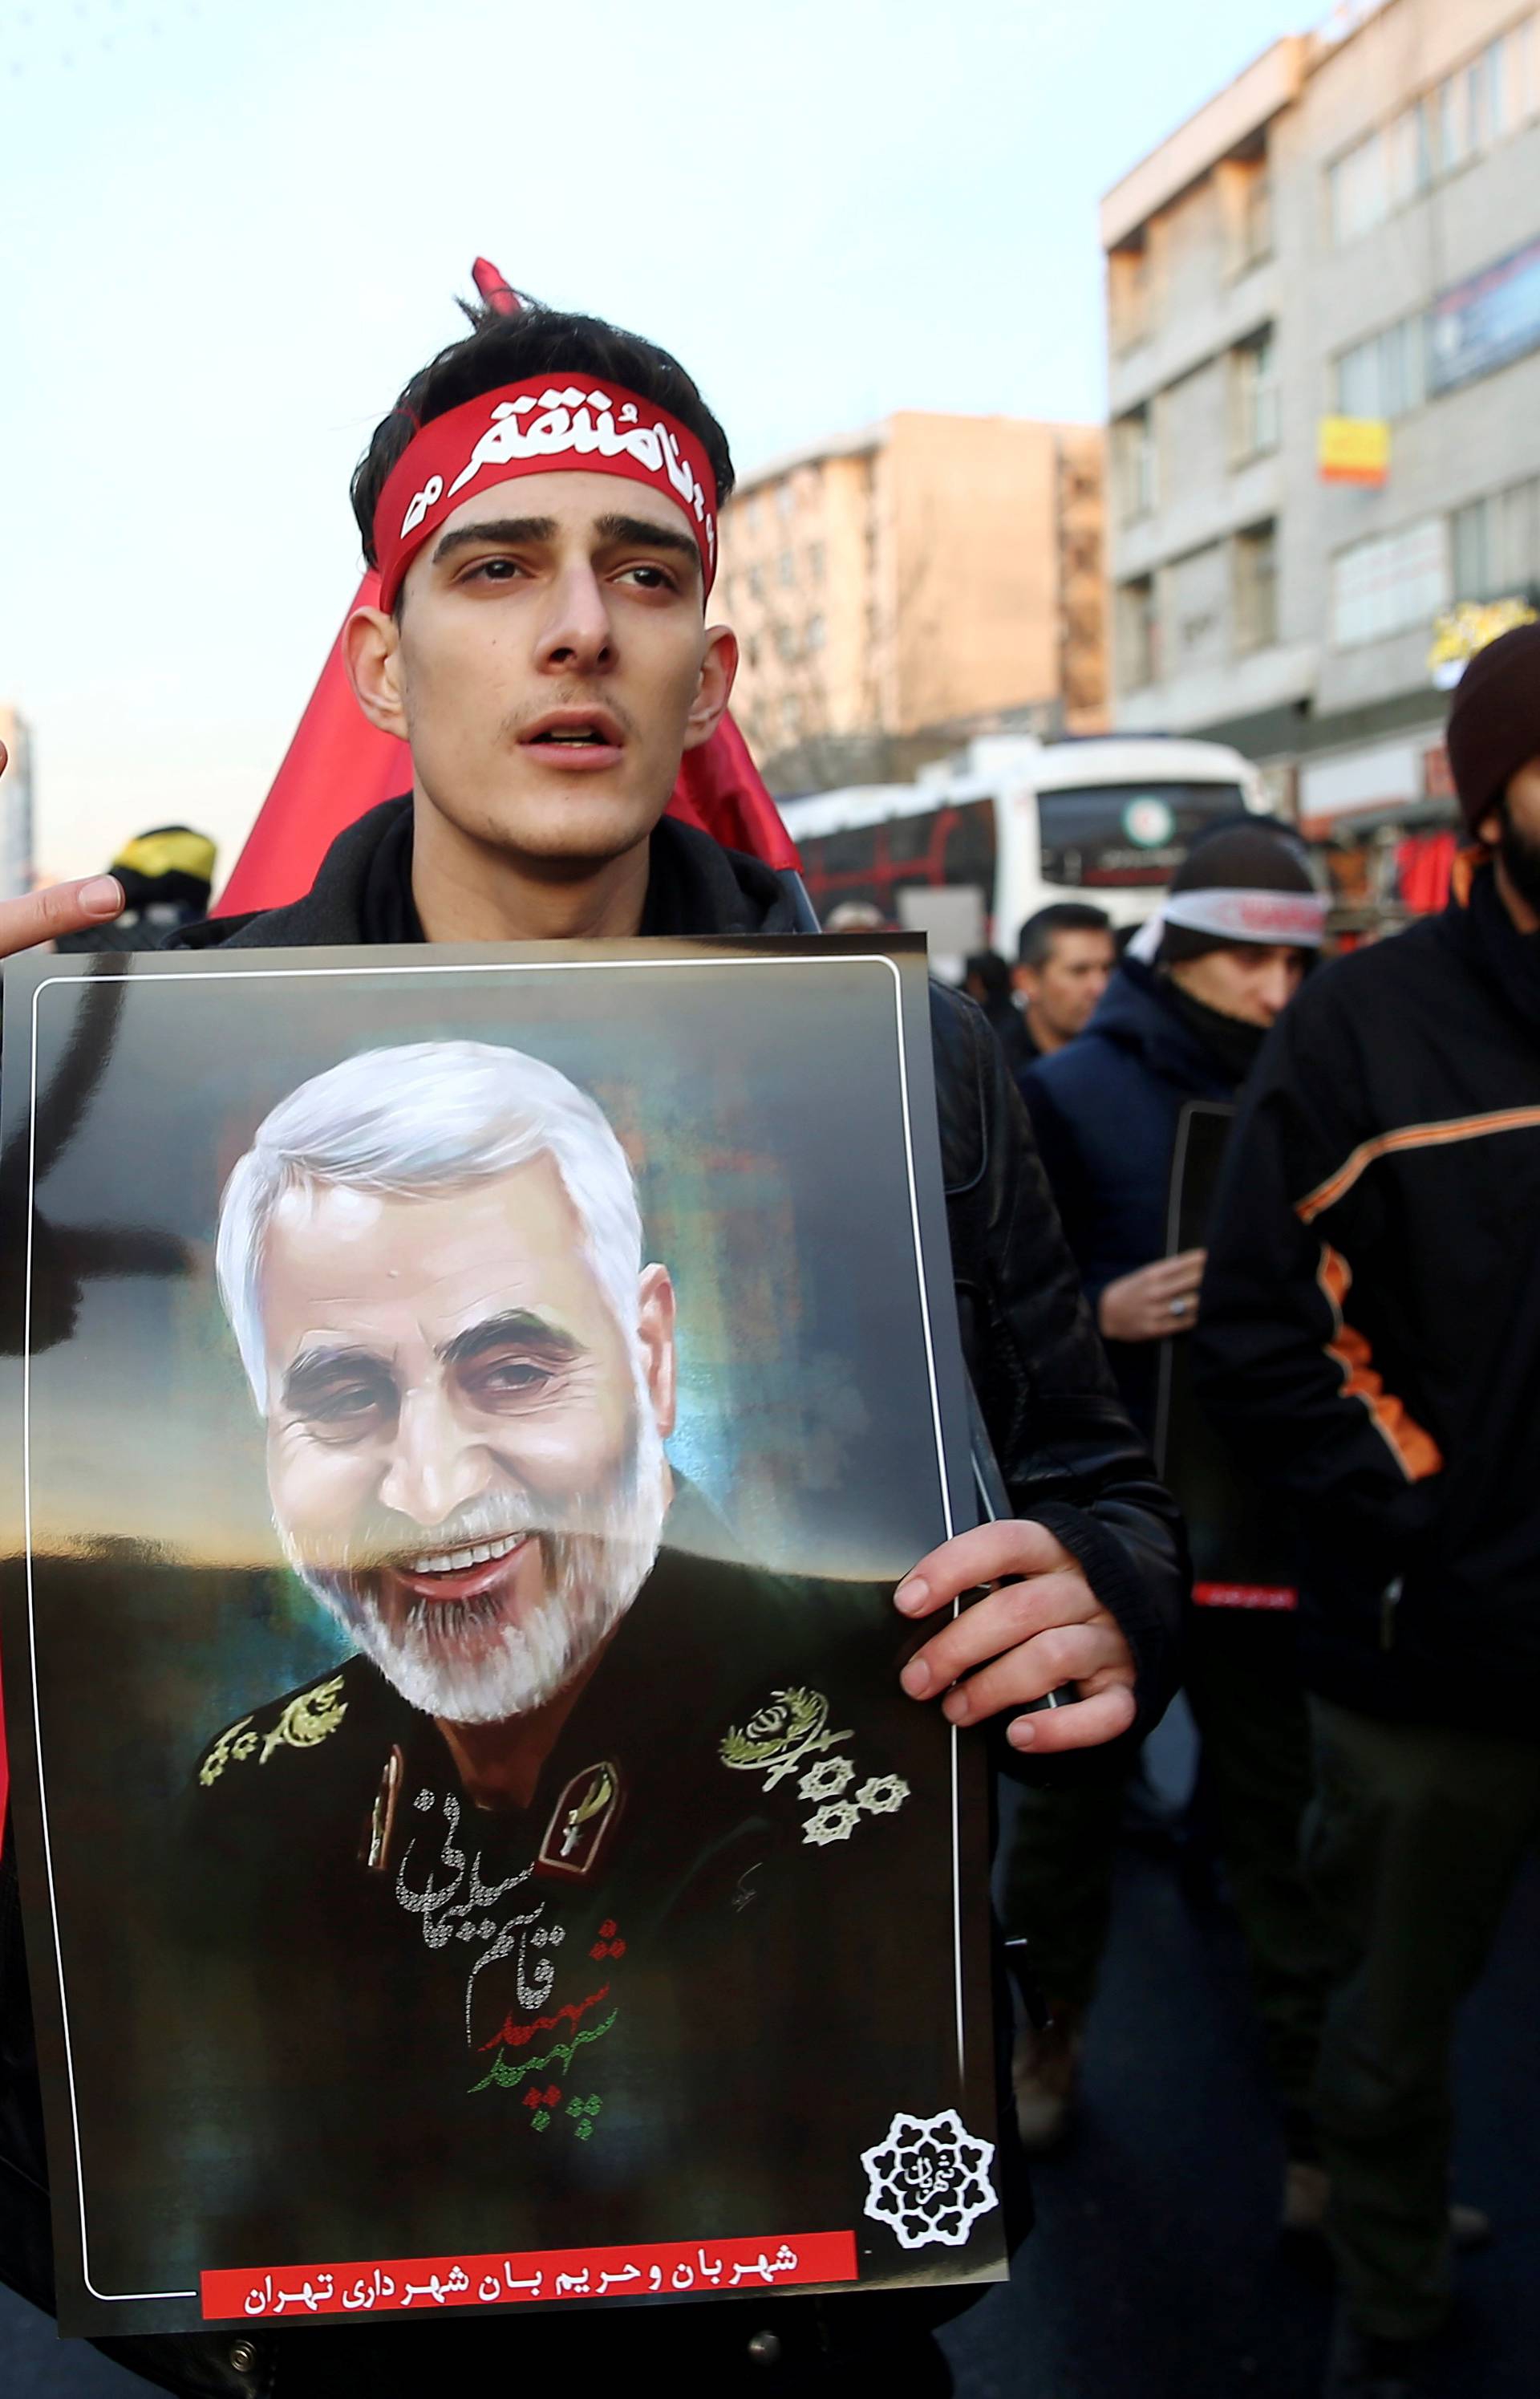 Funeral procession for Iranian Major-General Qassem Soleimani, head of the elite Quds Force, and Iraqi militia commander Abu Mahdi al-Muhandis, who were killed in an air strike at Baghdad airport, in Tehran